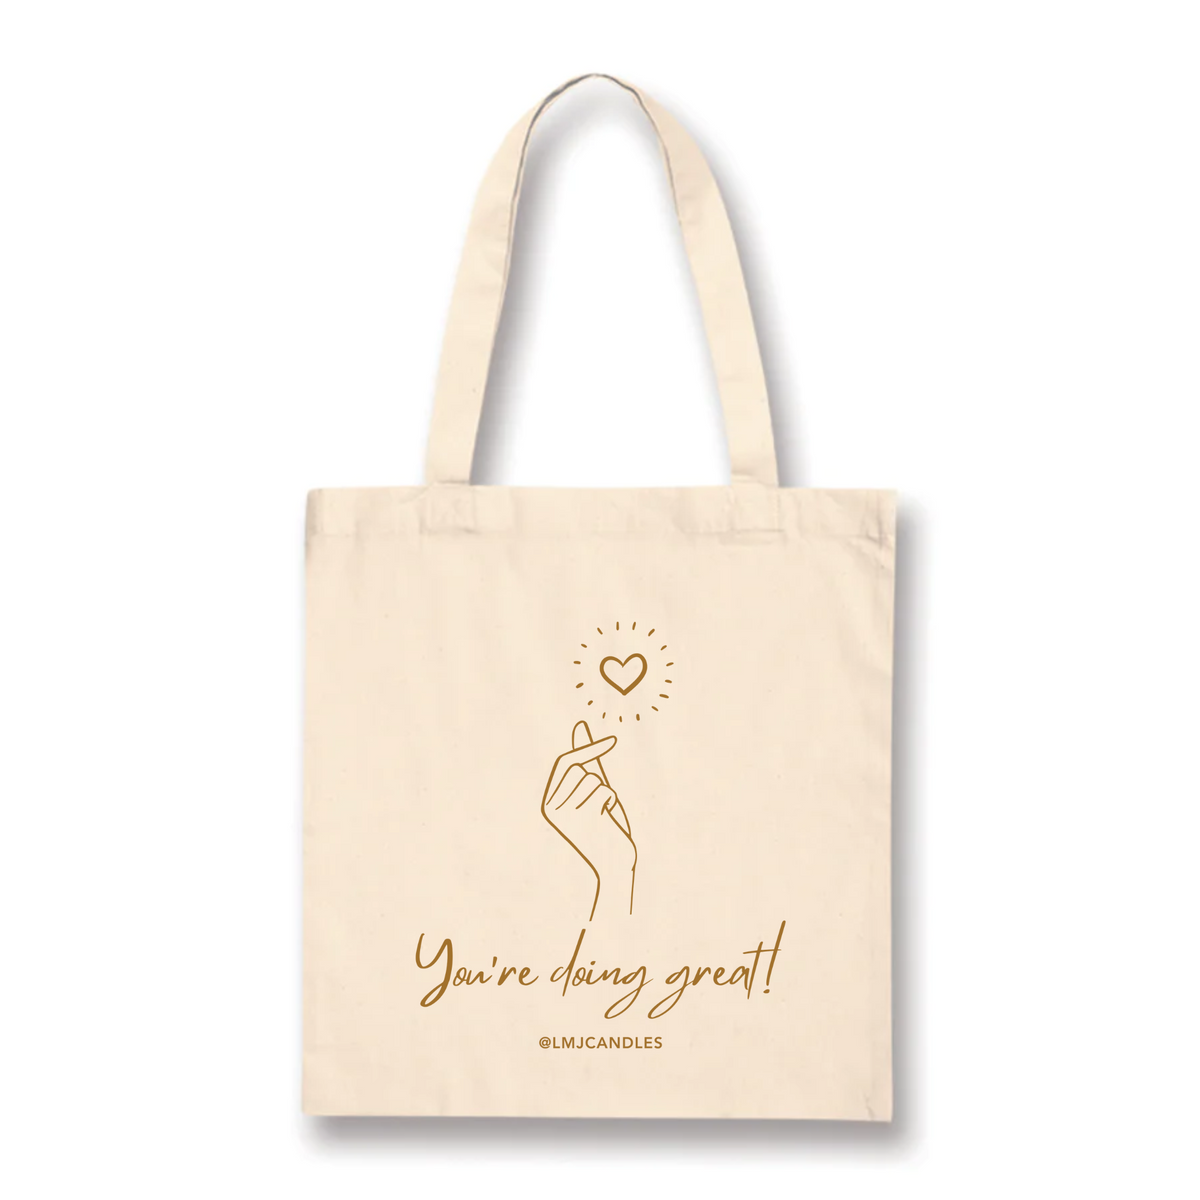 You're Doing Great! Recycled Cotton Tote Bag - LMJ Candles